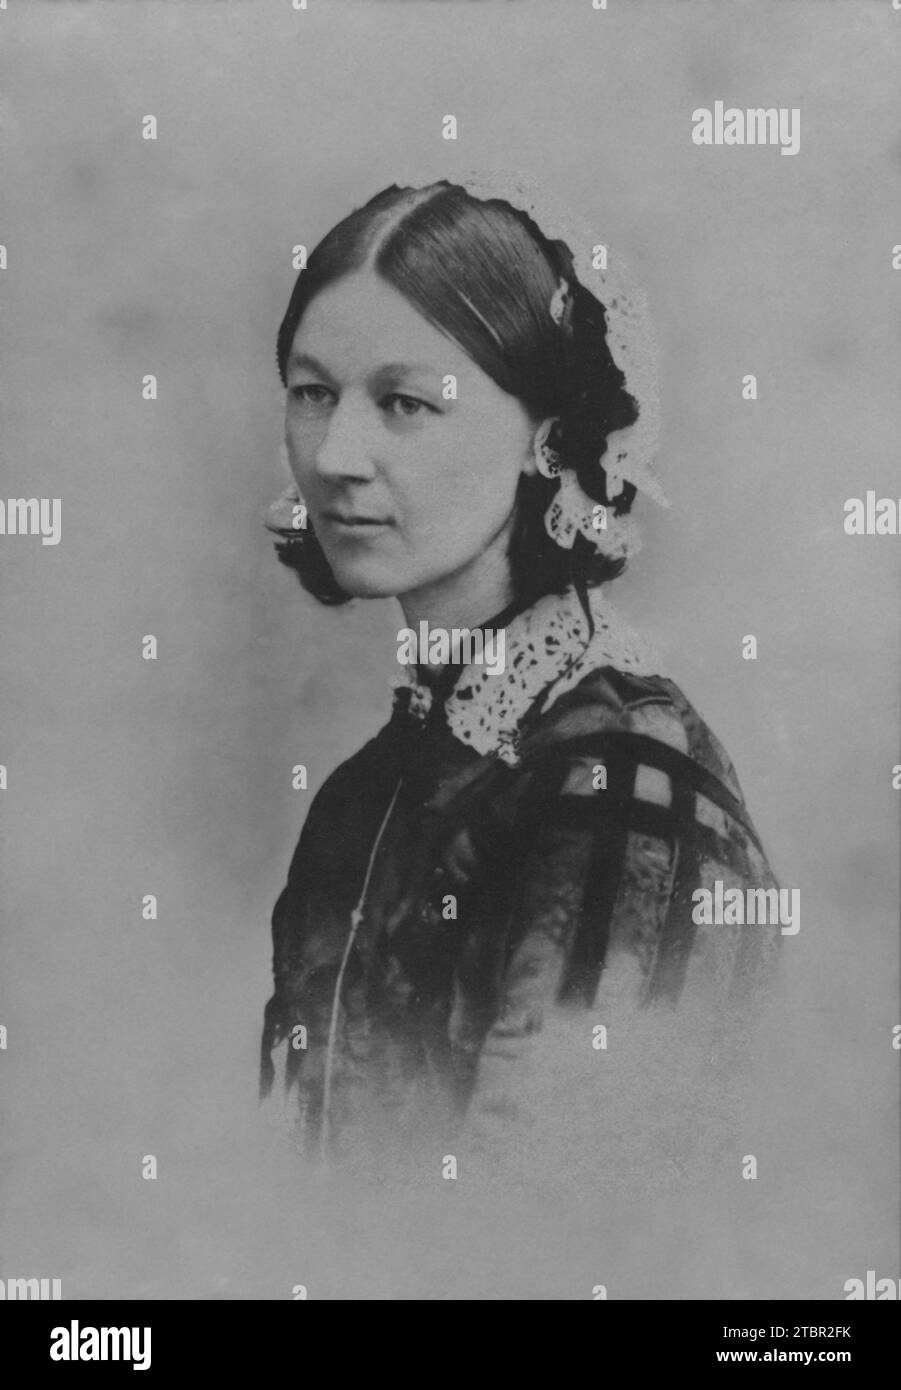 Florence Nightingale. env. 1860-1870 Banque D'Images